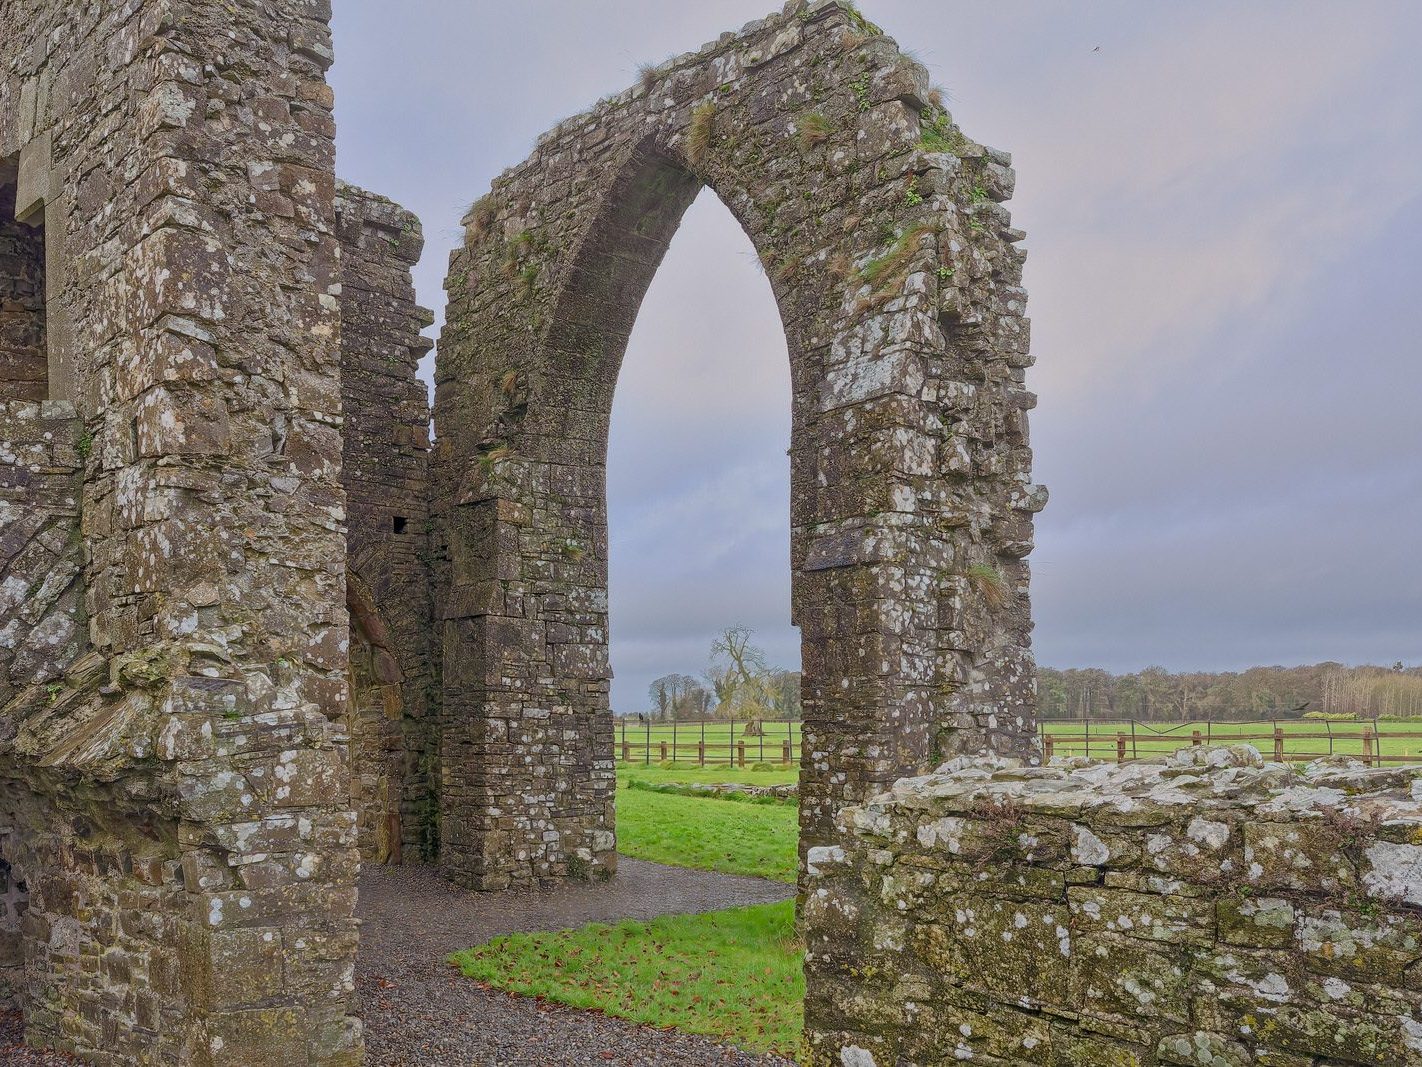 BECTIVE ABBEY WHICH I VISITED LAST CHRISTMAS [THERE WERE NO OTHER VISITORS AS IT WAS A VERY WET DAY]--225218-1